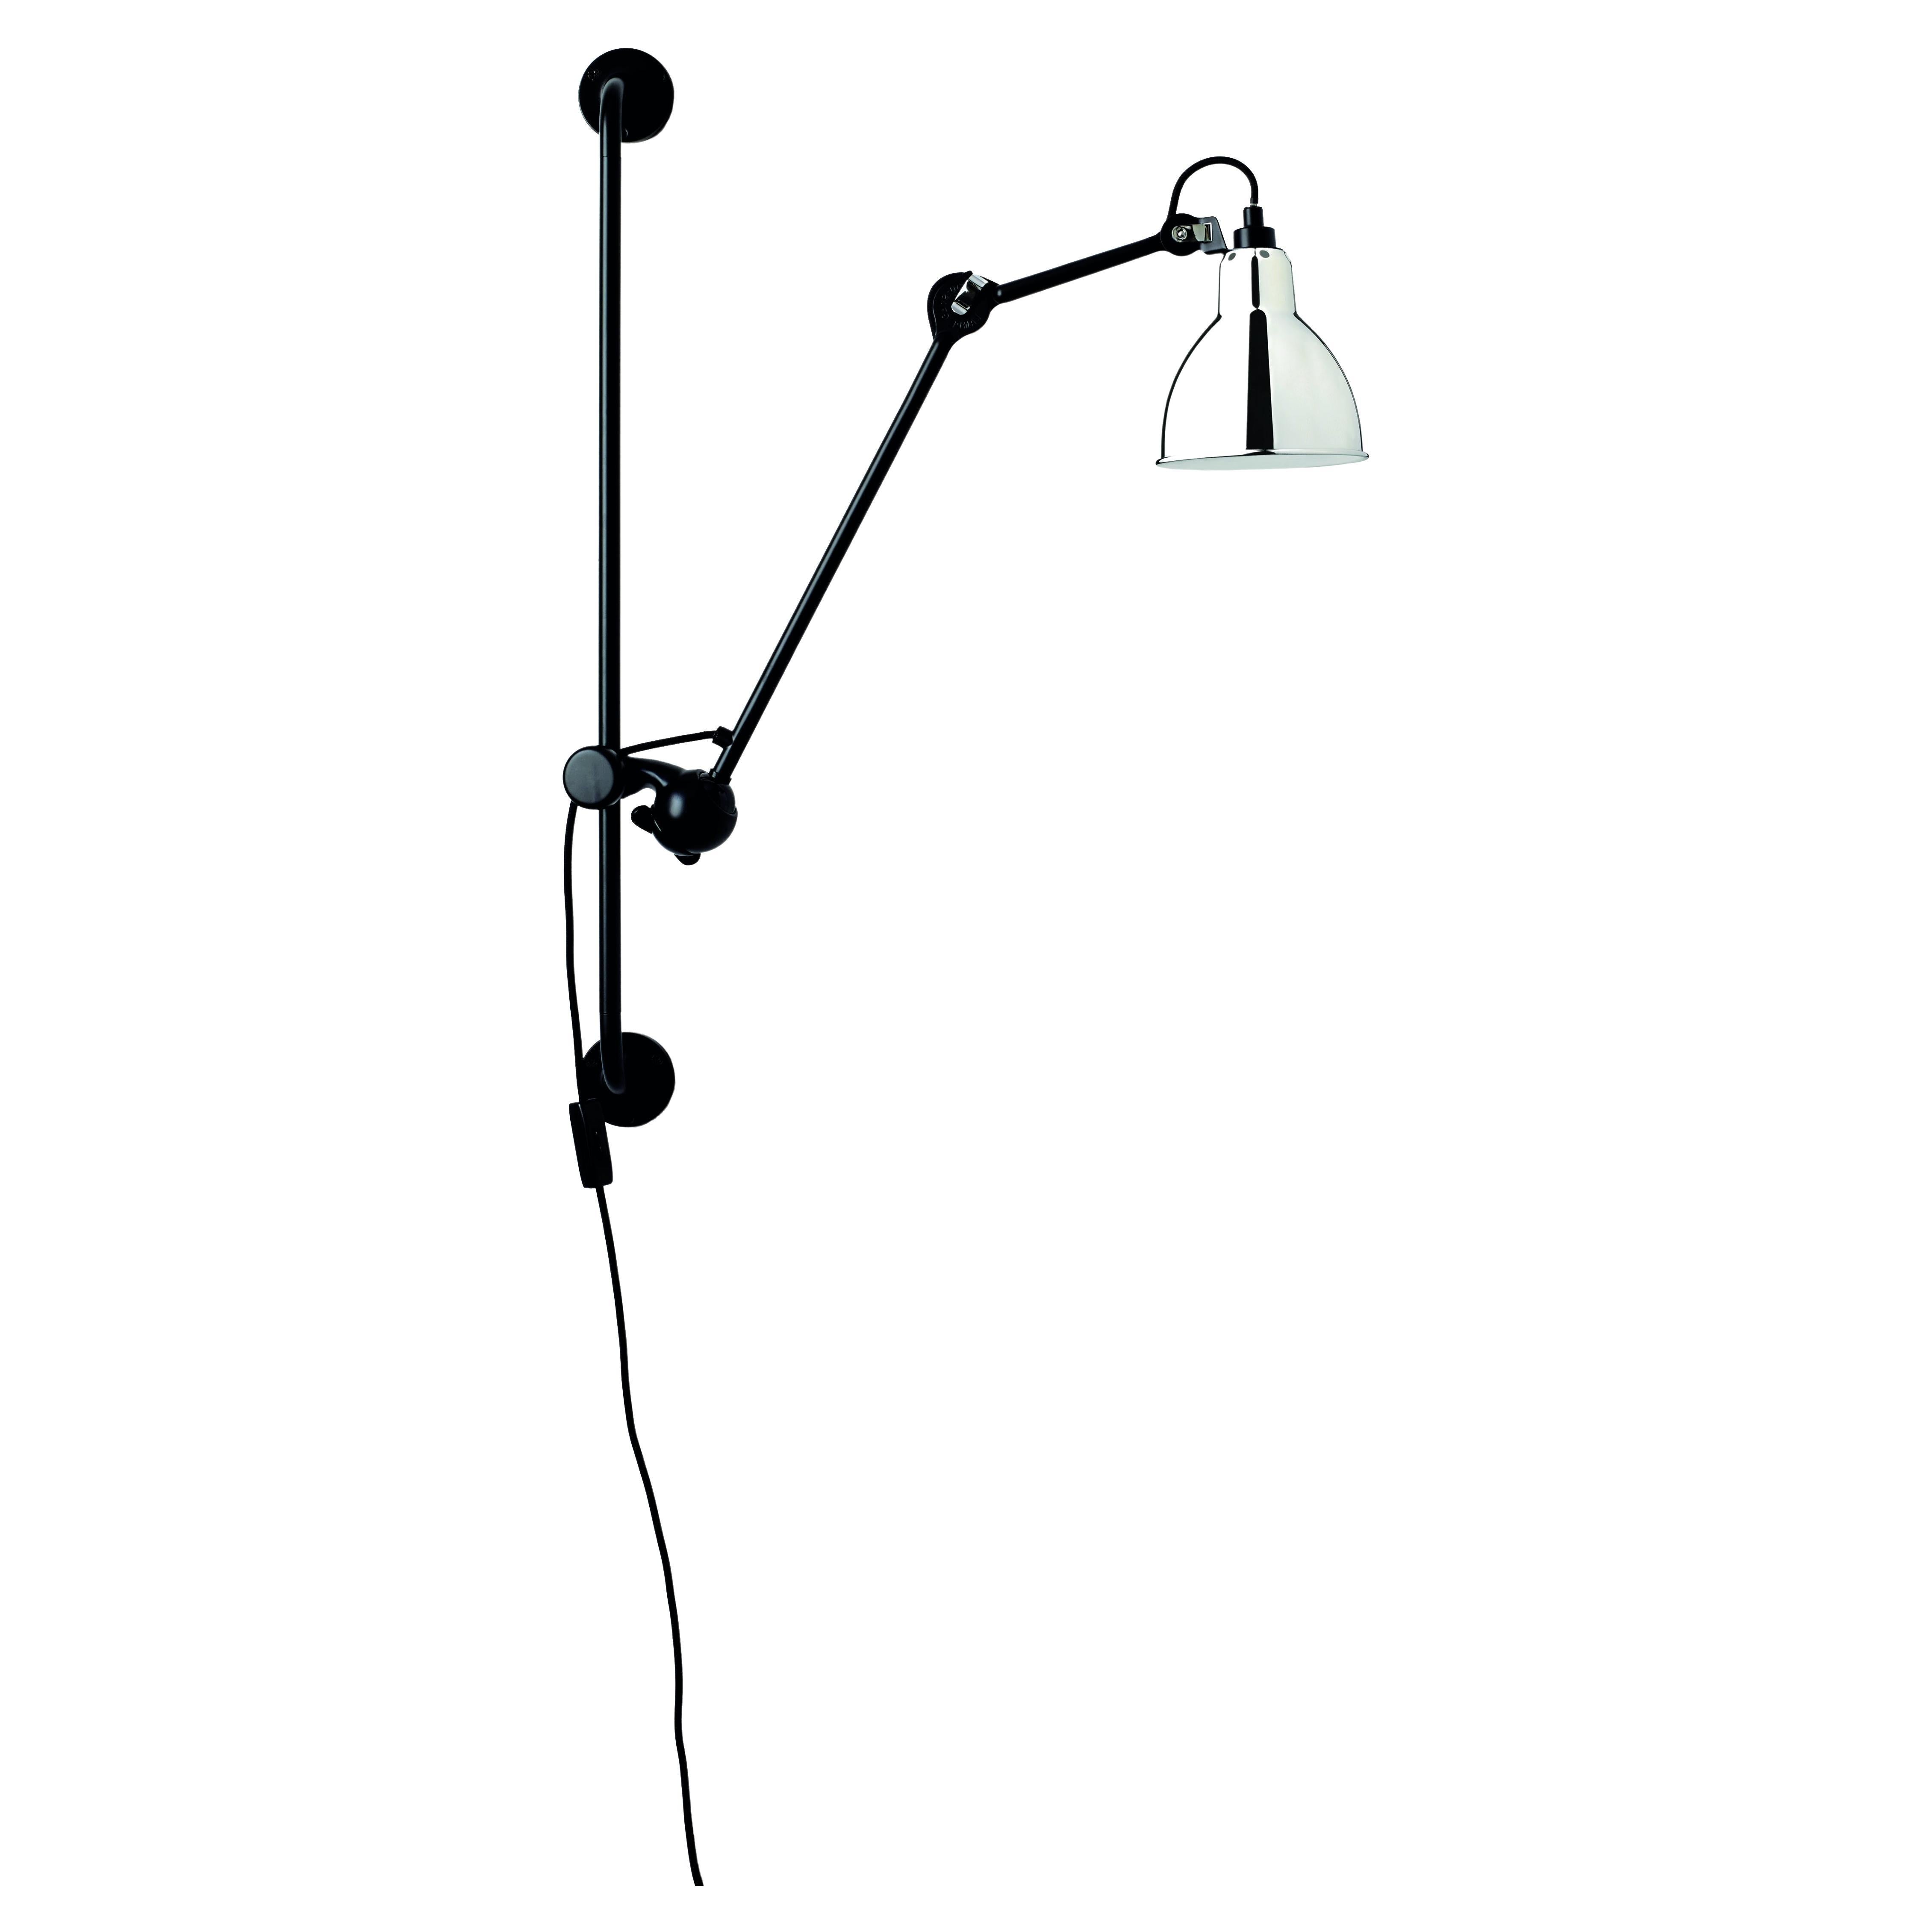 DCW Editions La Lampe Gras N°210 Wall Lamp in Black Arm and Chrome Shade For Sale